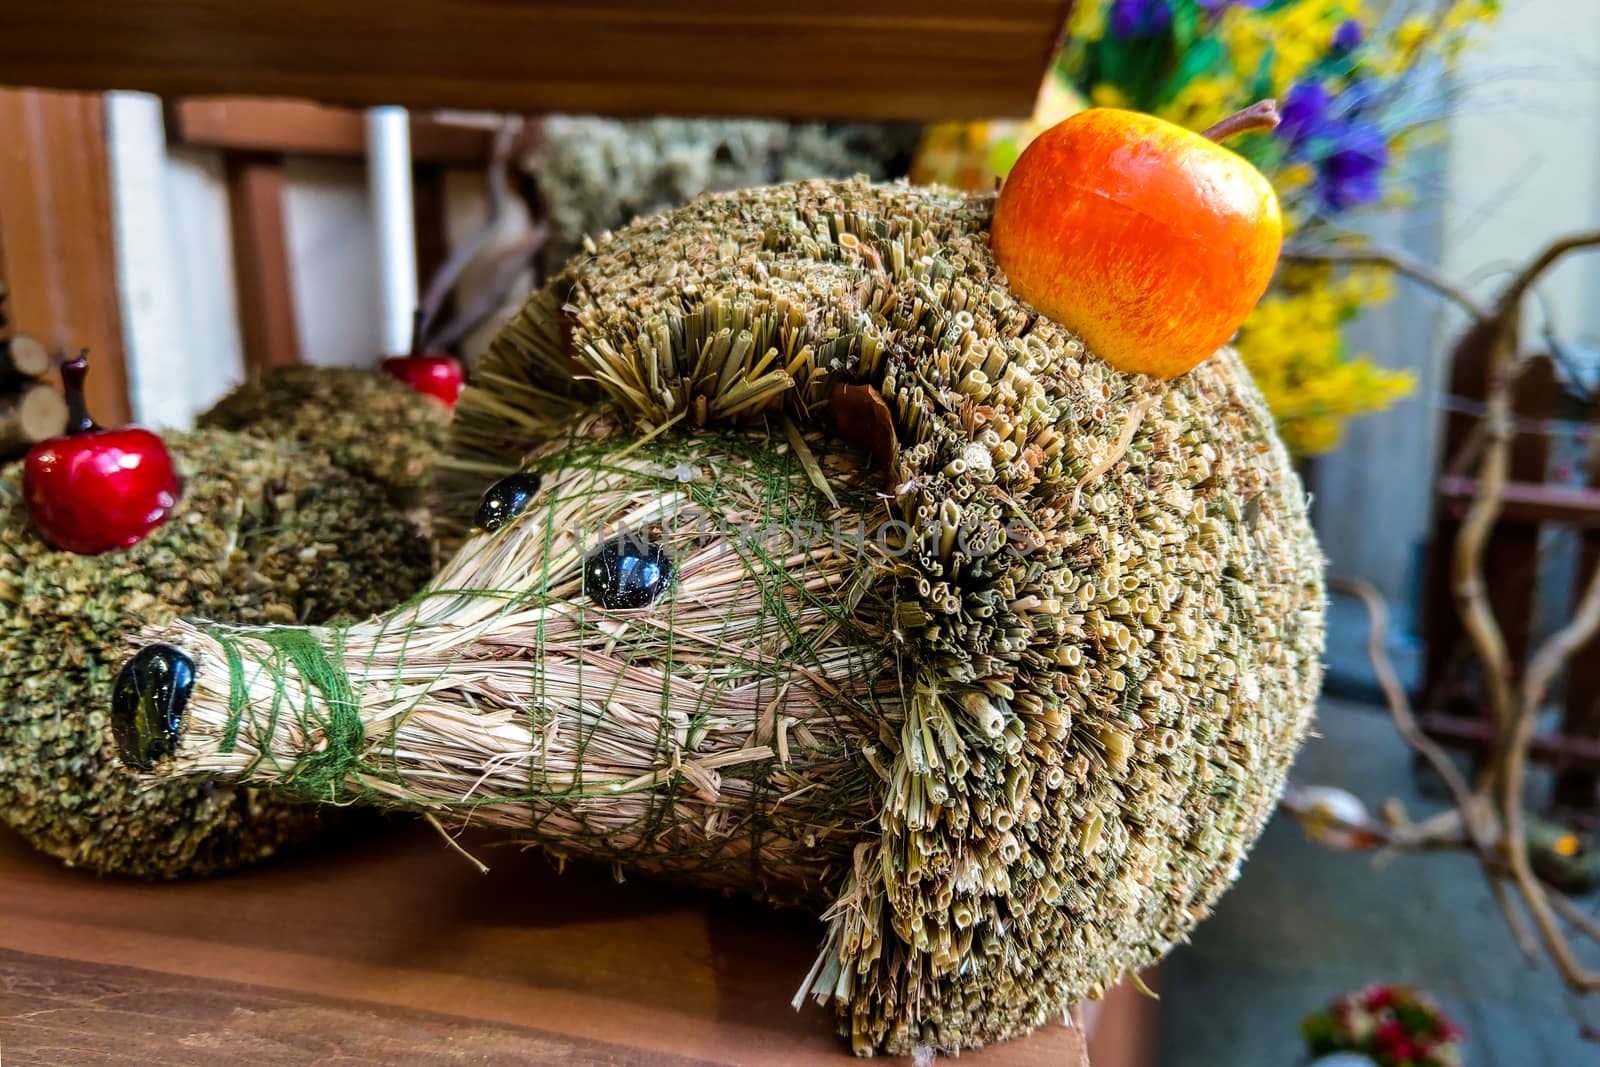 Beautiful decorative hedgehog made of straw with an apple